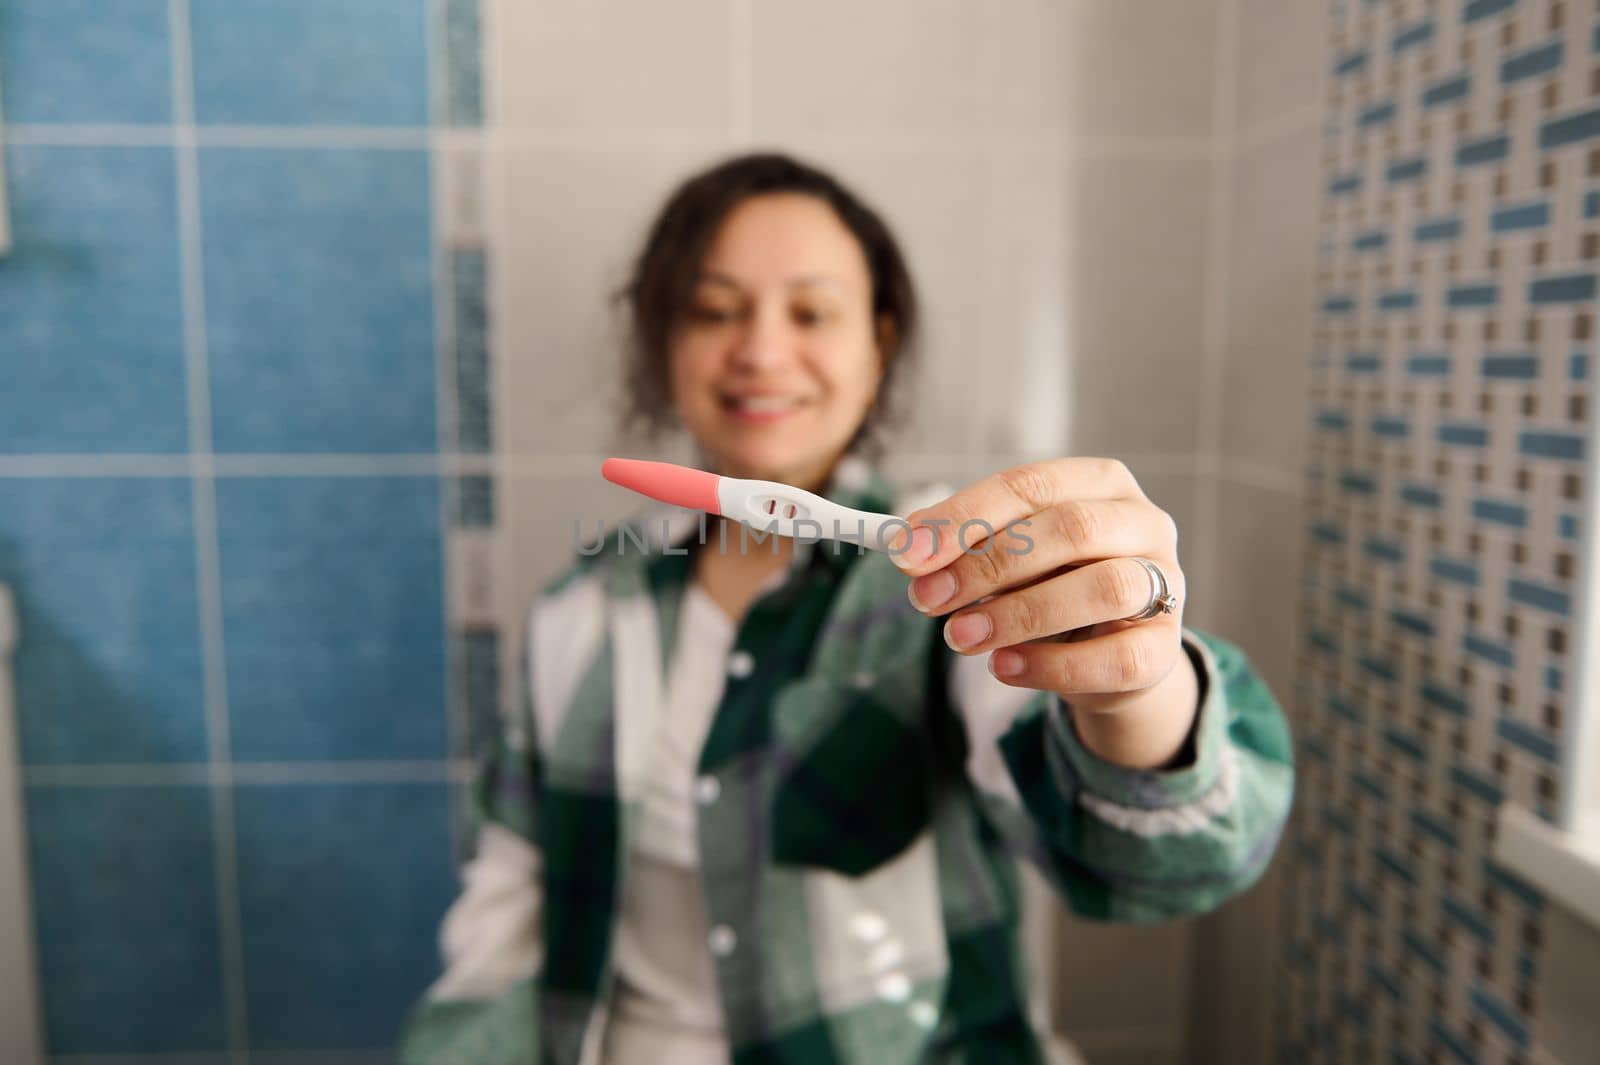 Positive pregnancy test in a happy woman's hands. People, maternity and pregnancy concept by artgf